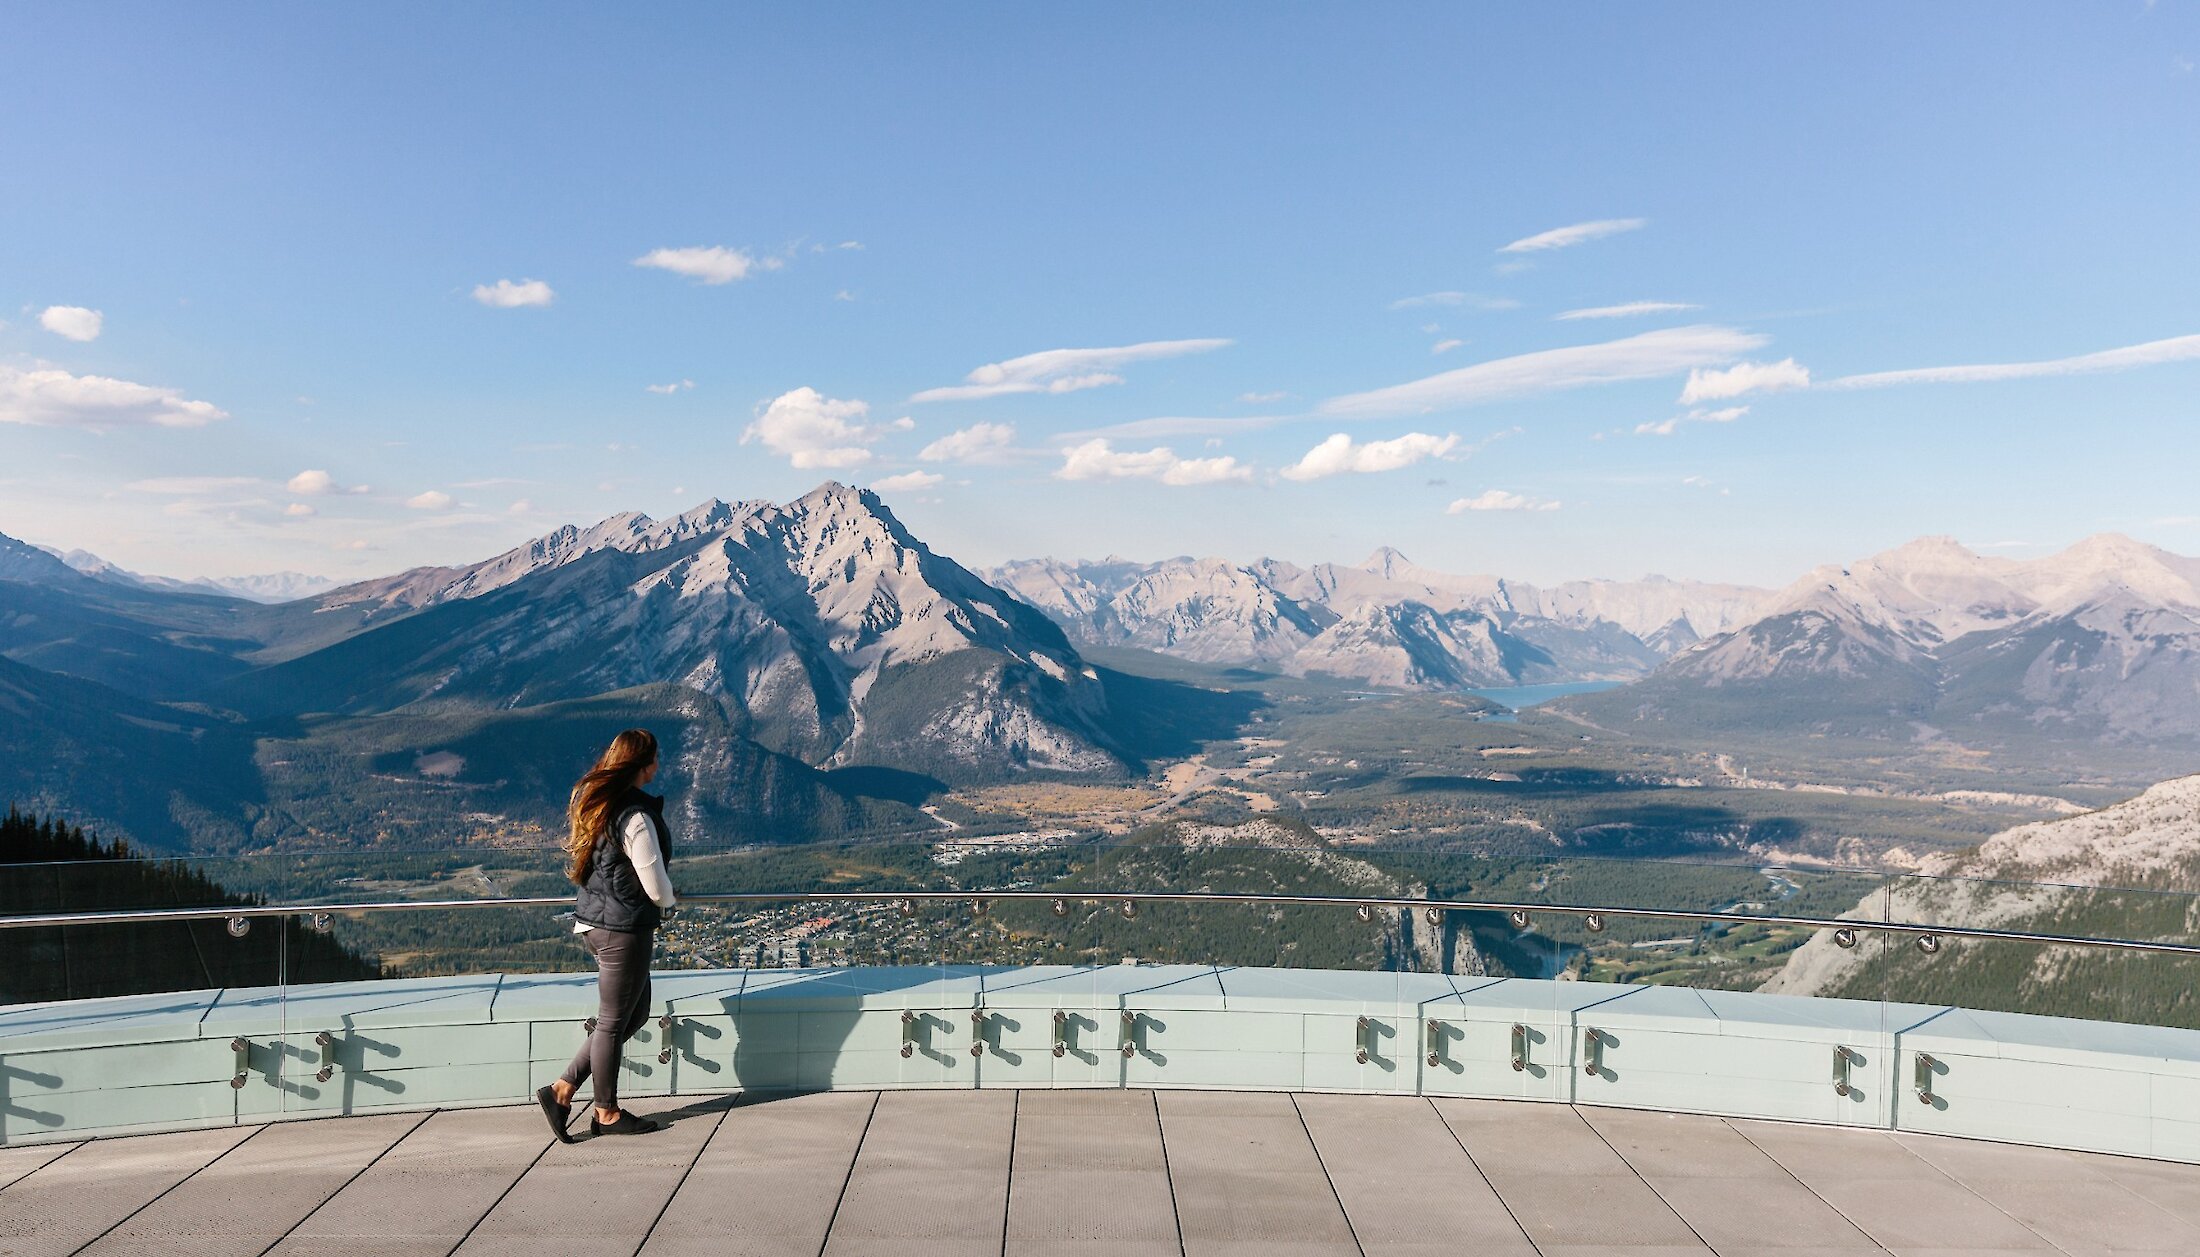 Lady admiring the views from the top of the Banff Gondola in summer